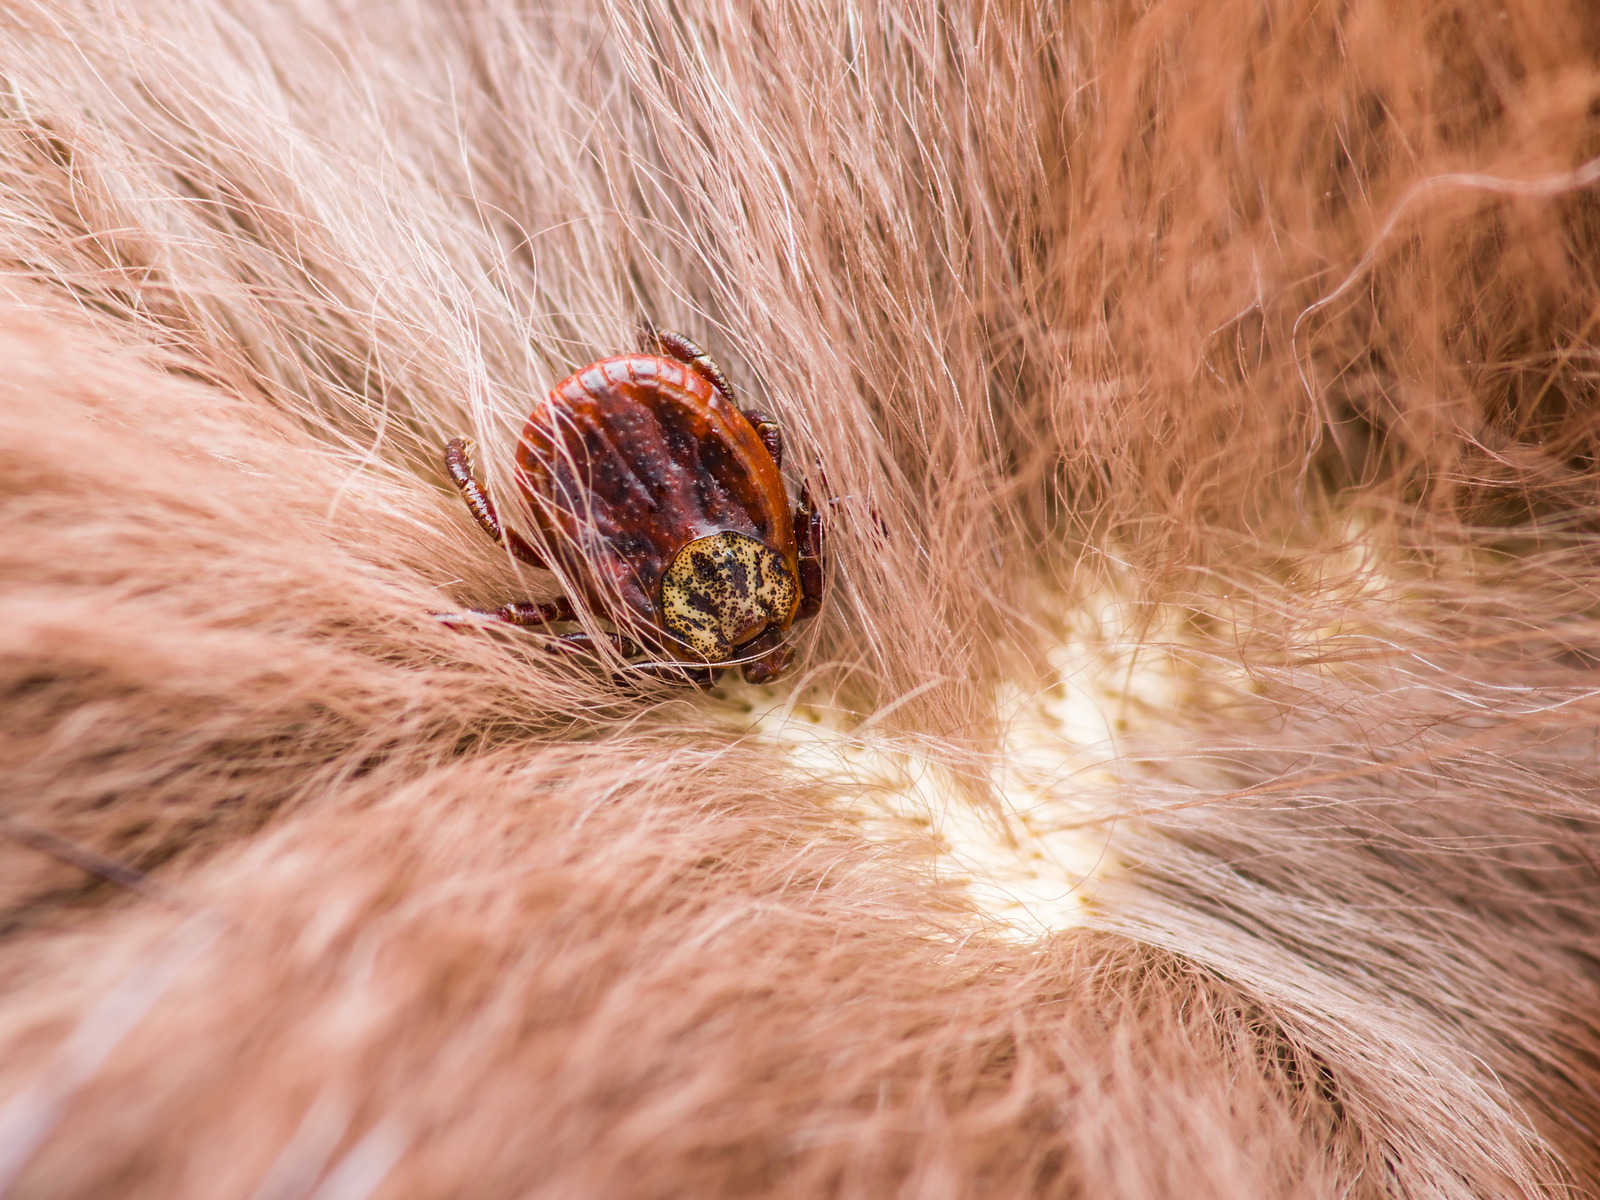 Signs and Symptoms of Lyme Disease in Dogs